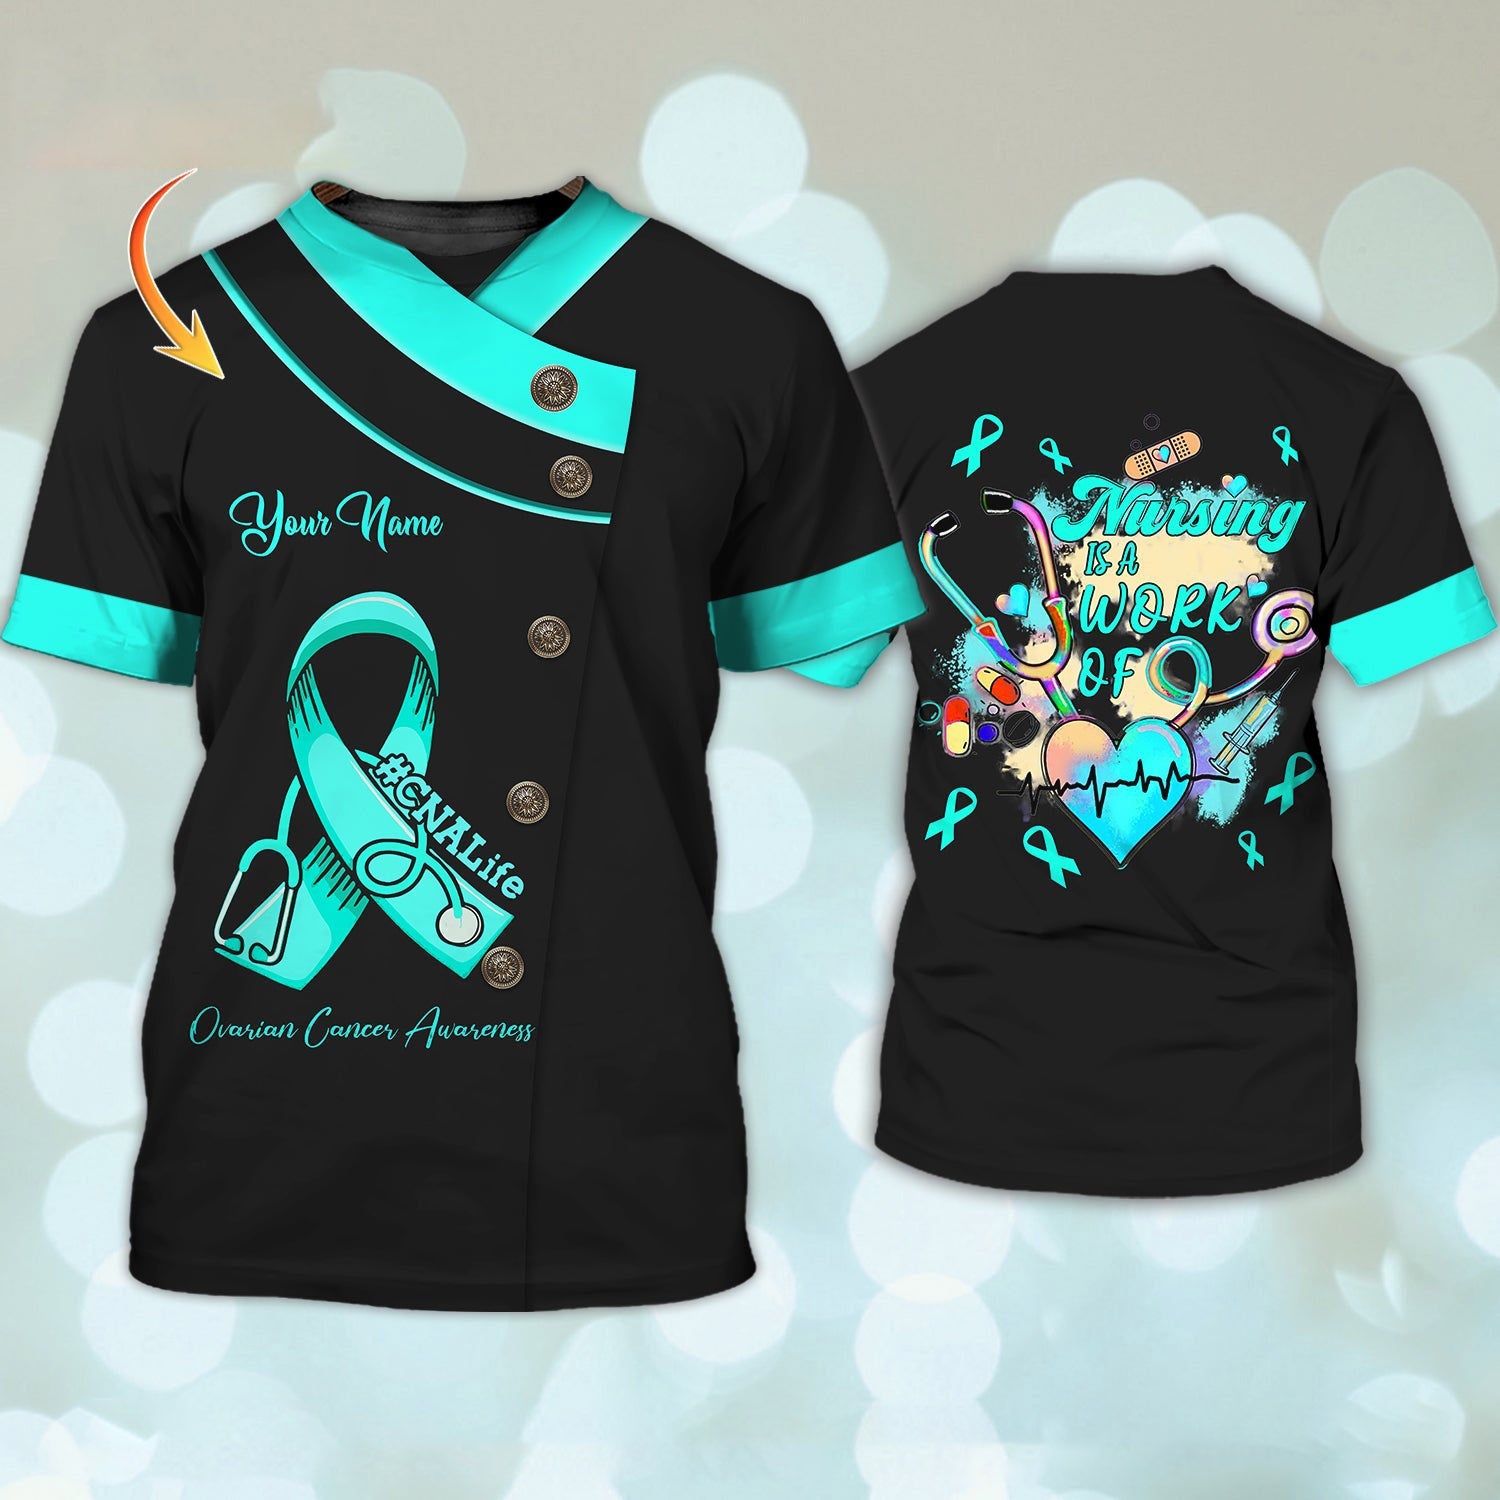 Cnalife Ovarian Cancer Awareness Personalized Name 3D Tshirt Tad (Non Workwear)